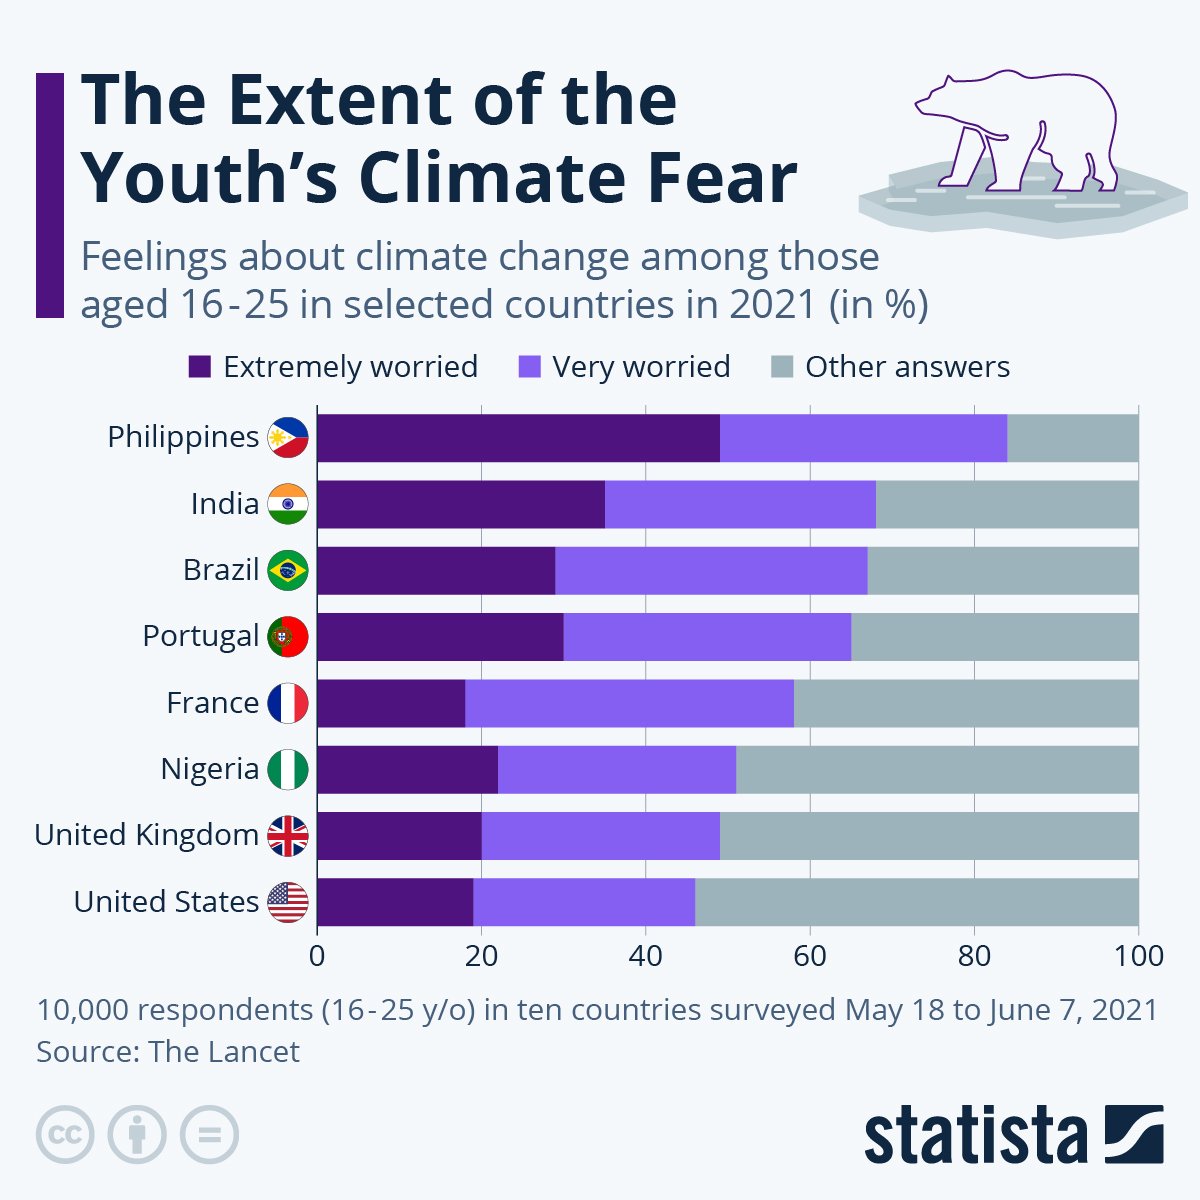 About 70% of the world's young population considers climate change a top worry. It is up to our generation to create change. #ClimateEmergency #youthaction #CarbonPrice